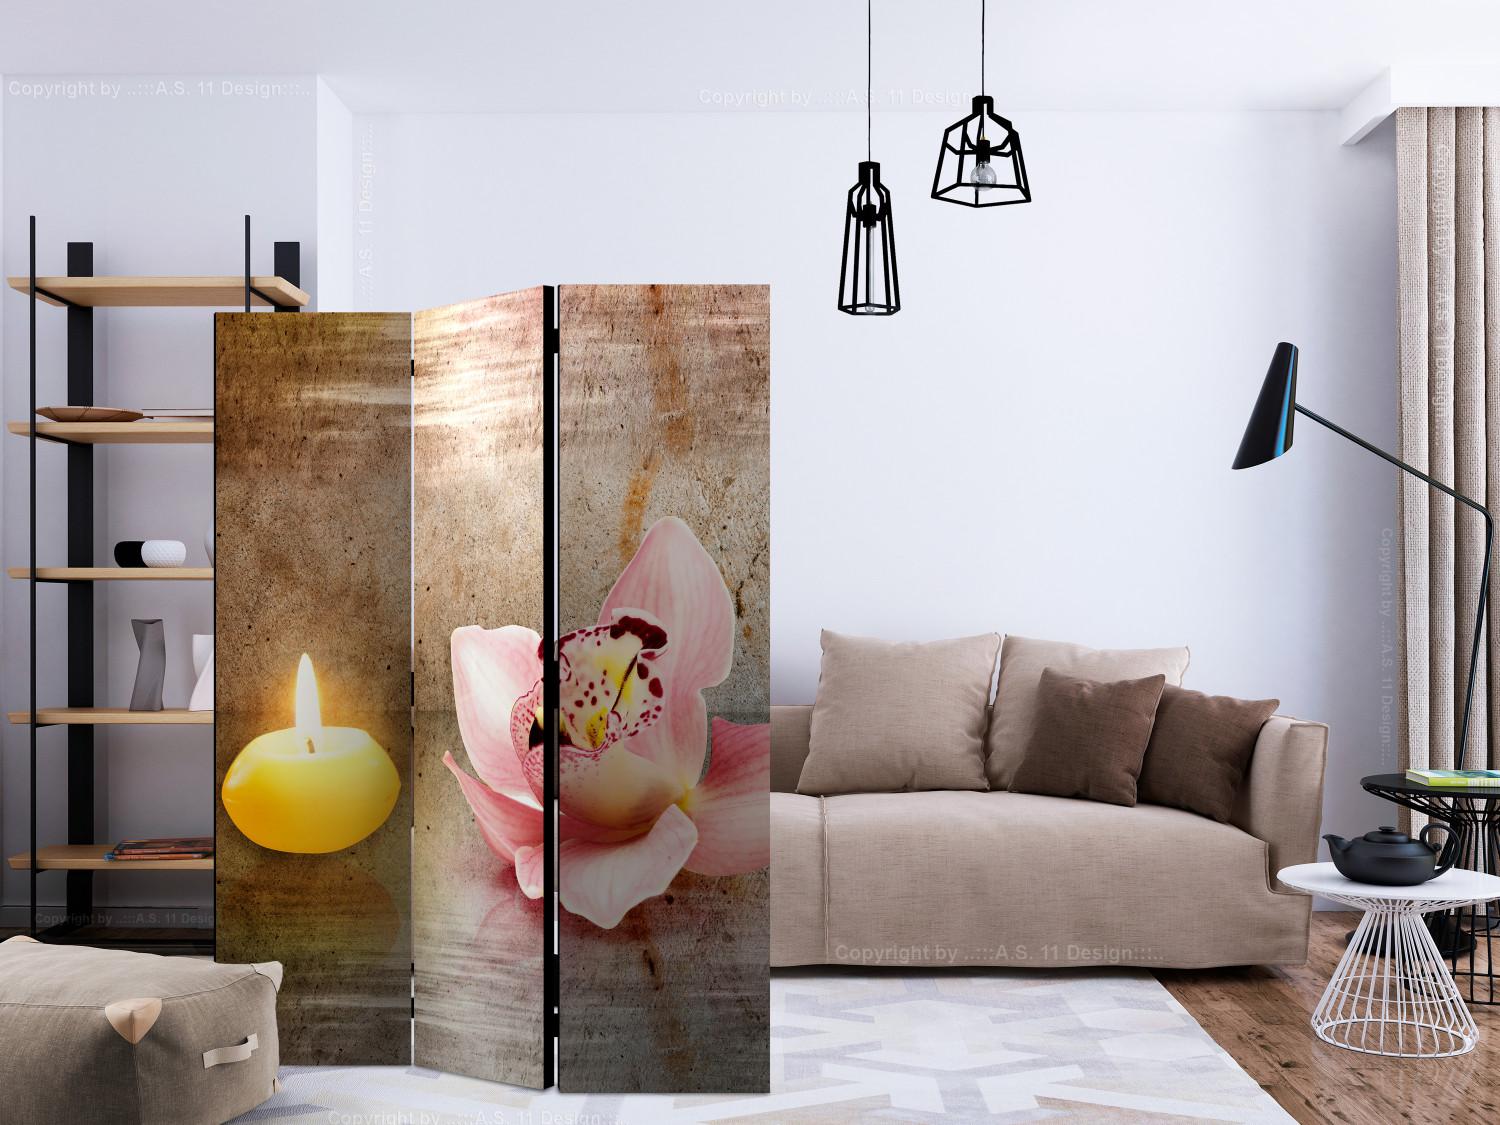 Room Divider Romantic Evening (3-piece) - pink orchid and yellow candle